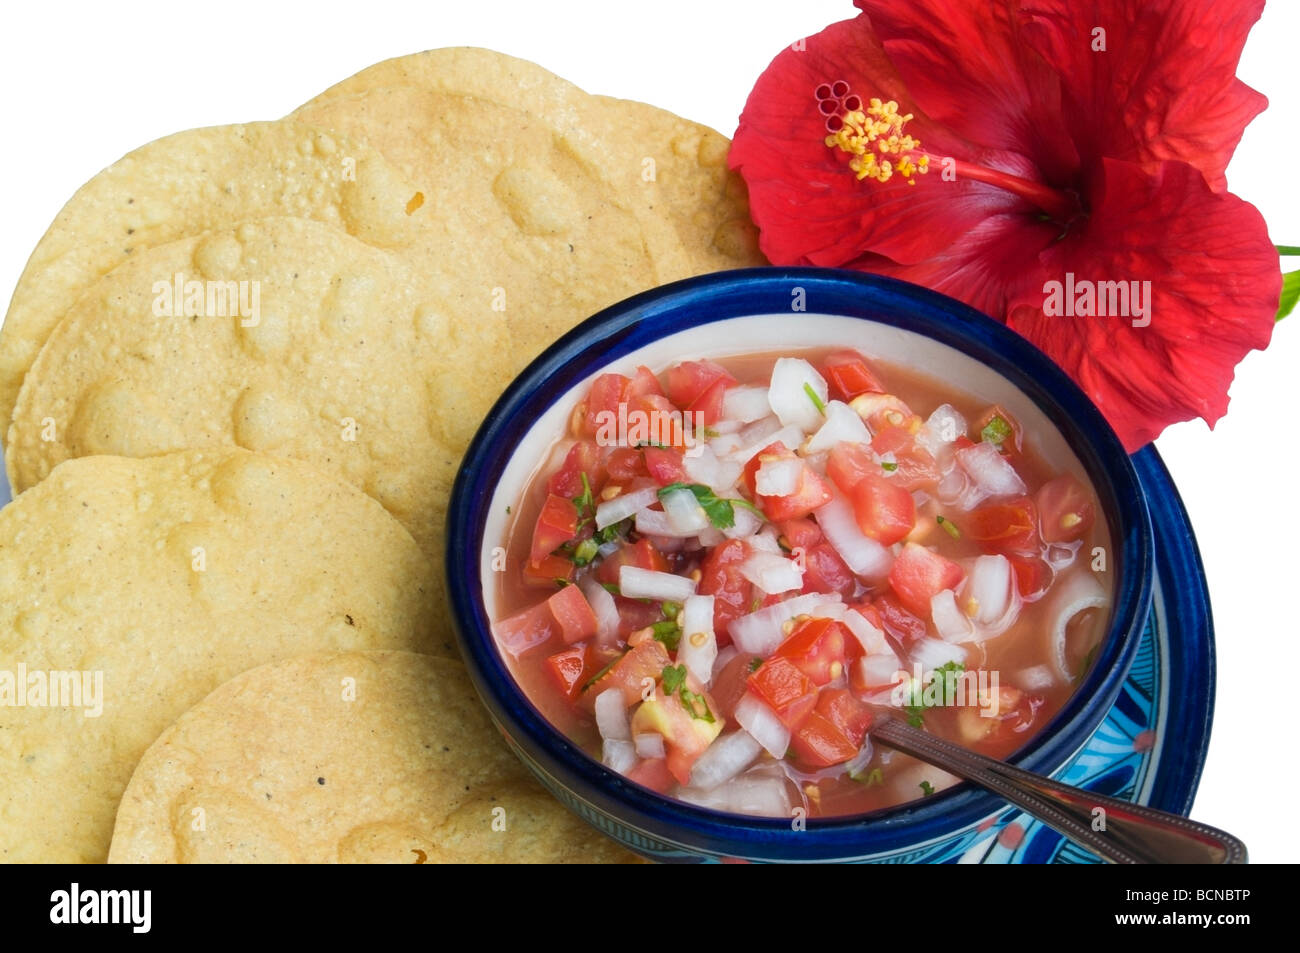 Tortilla chips and fresh salsa are served on a plate garnished with a red hibiscus flower. Stock Photo